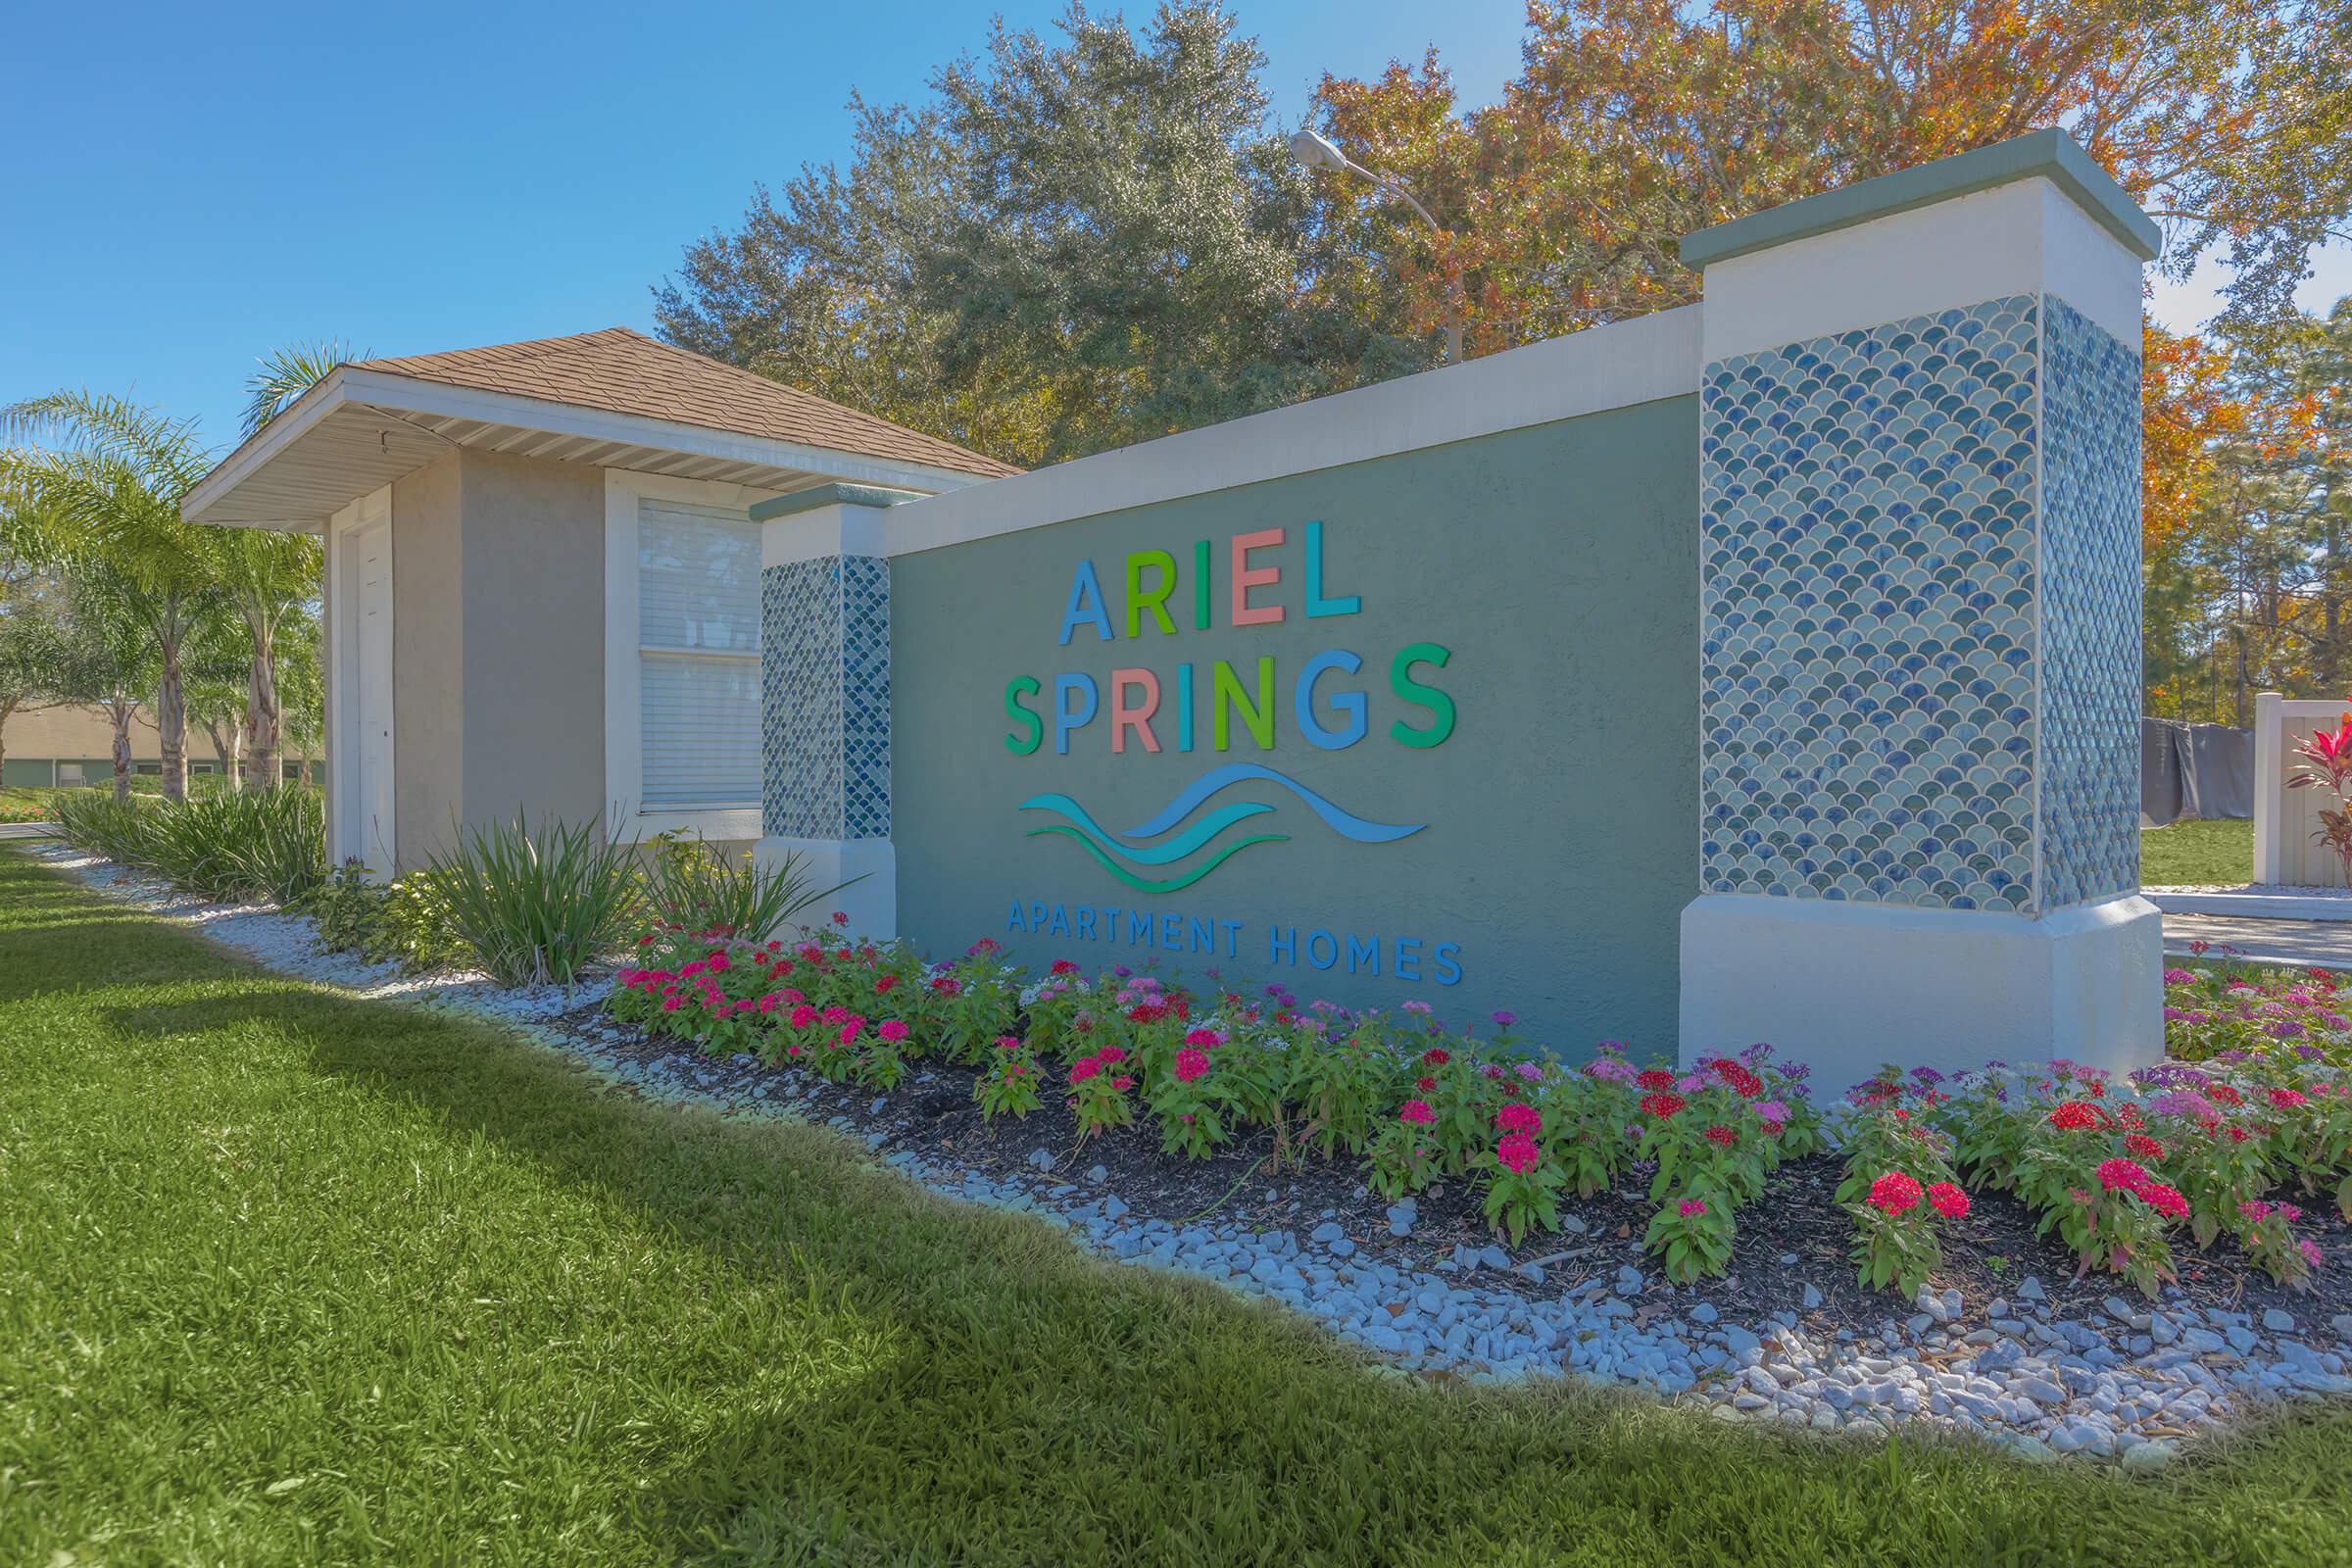 ARIEL SPRINGS APARTMENTS IN SPRING HILL, FL